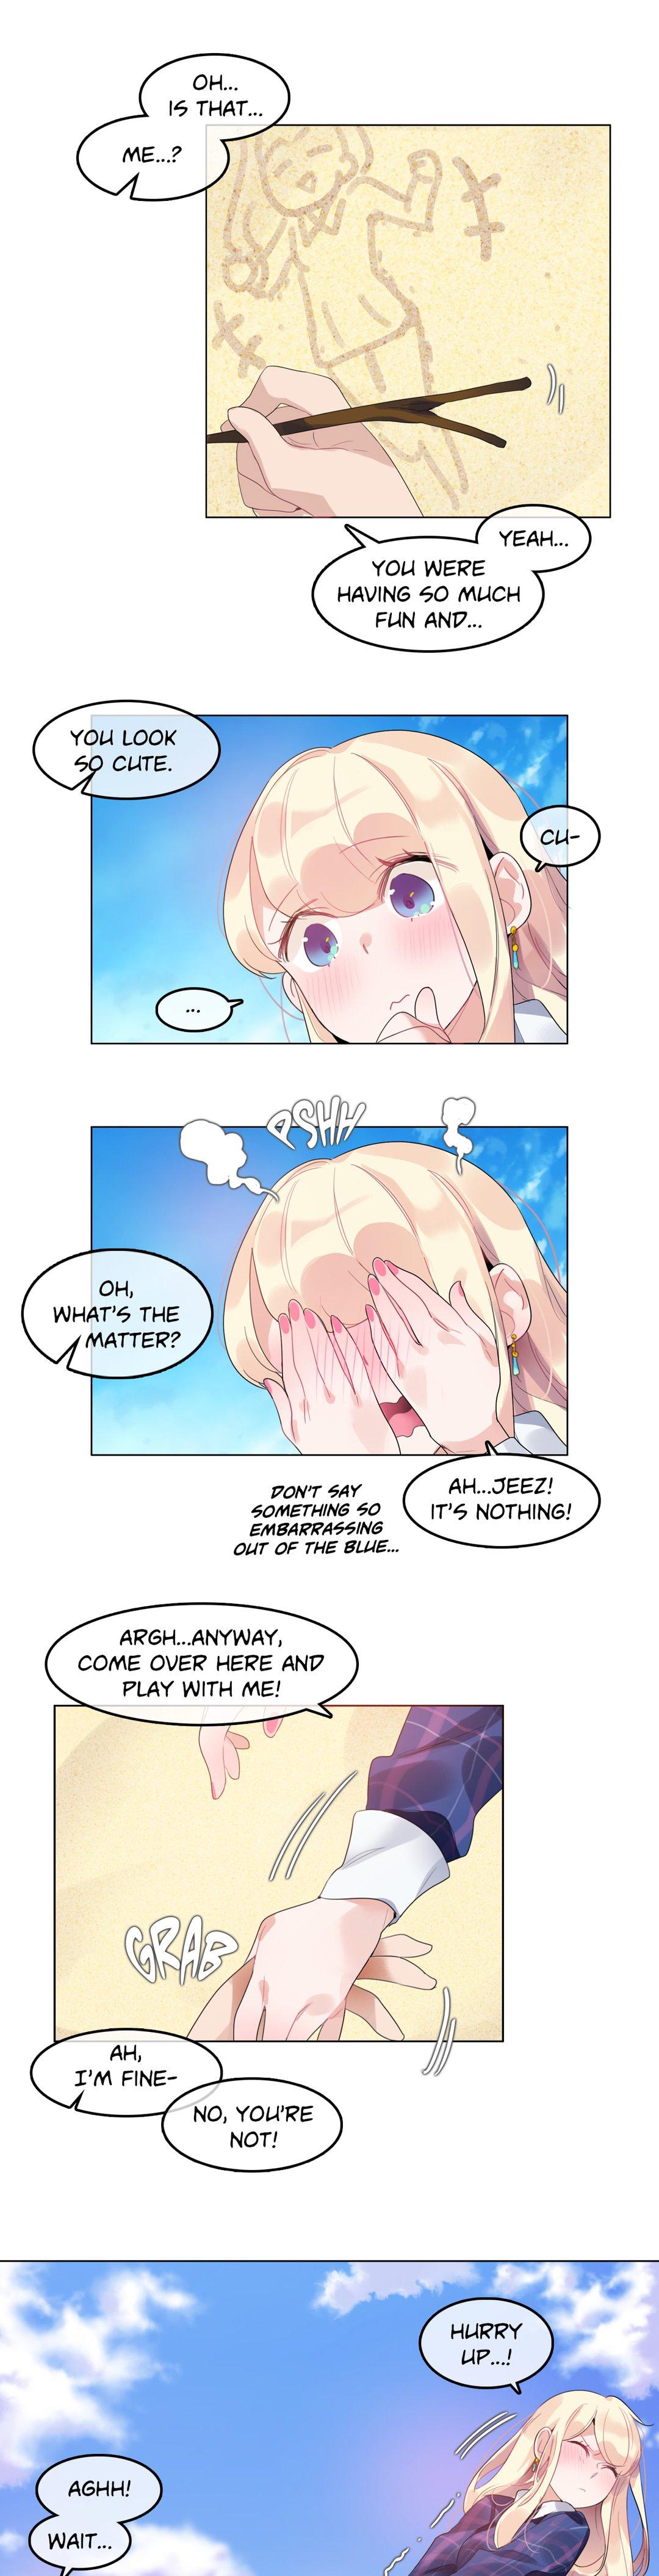 A Pervert's Daily Life • Chapter 41-45 49